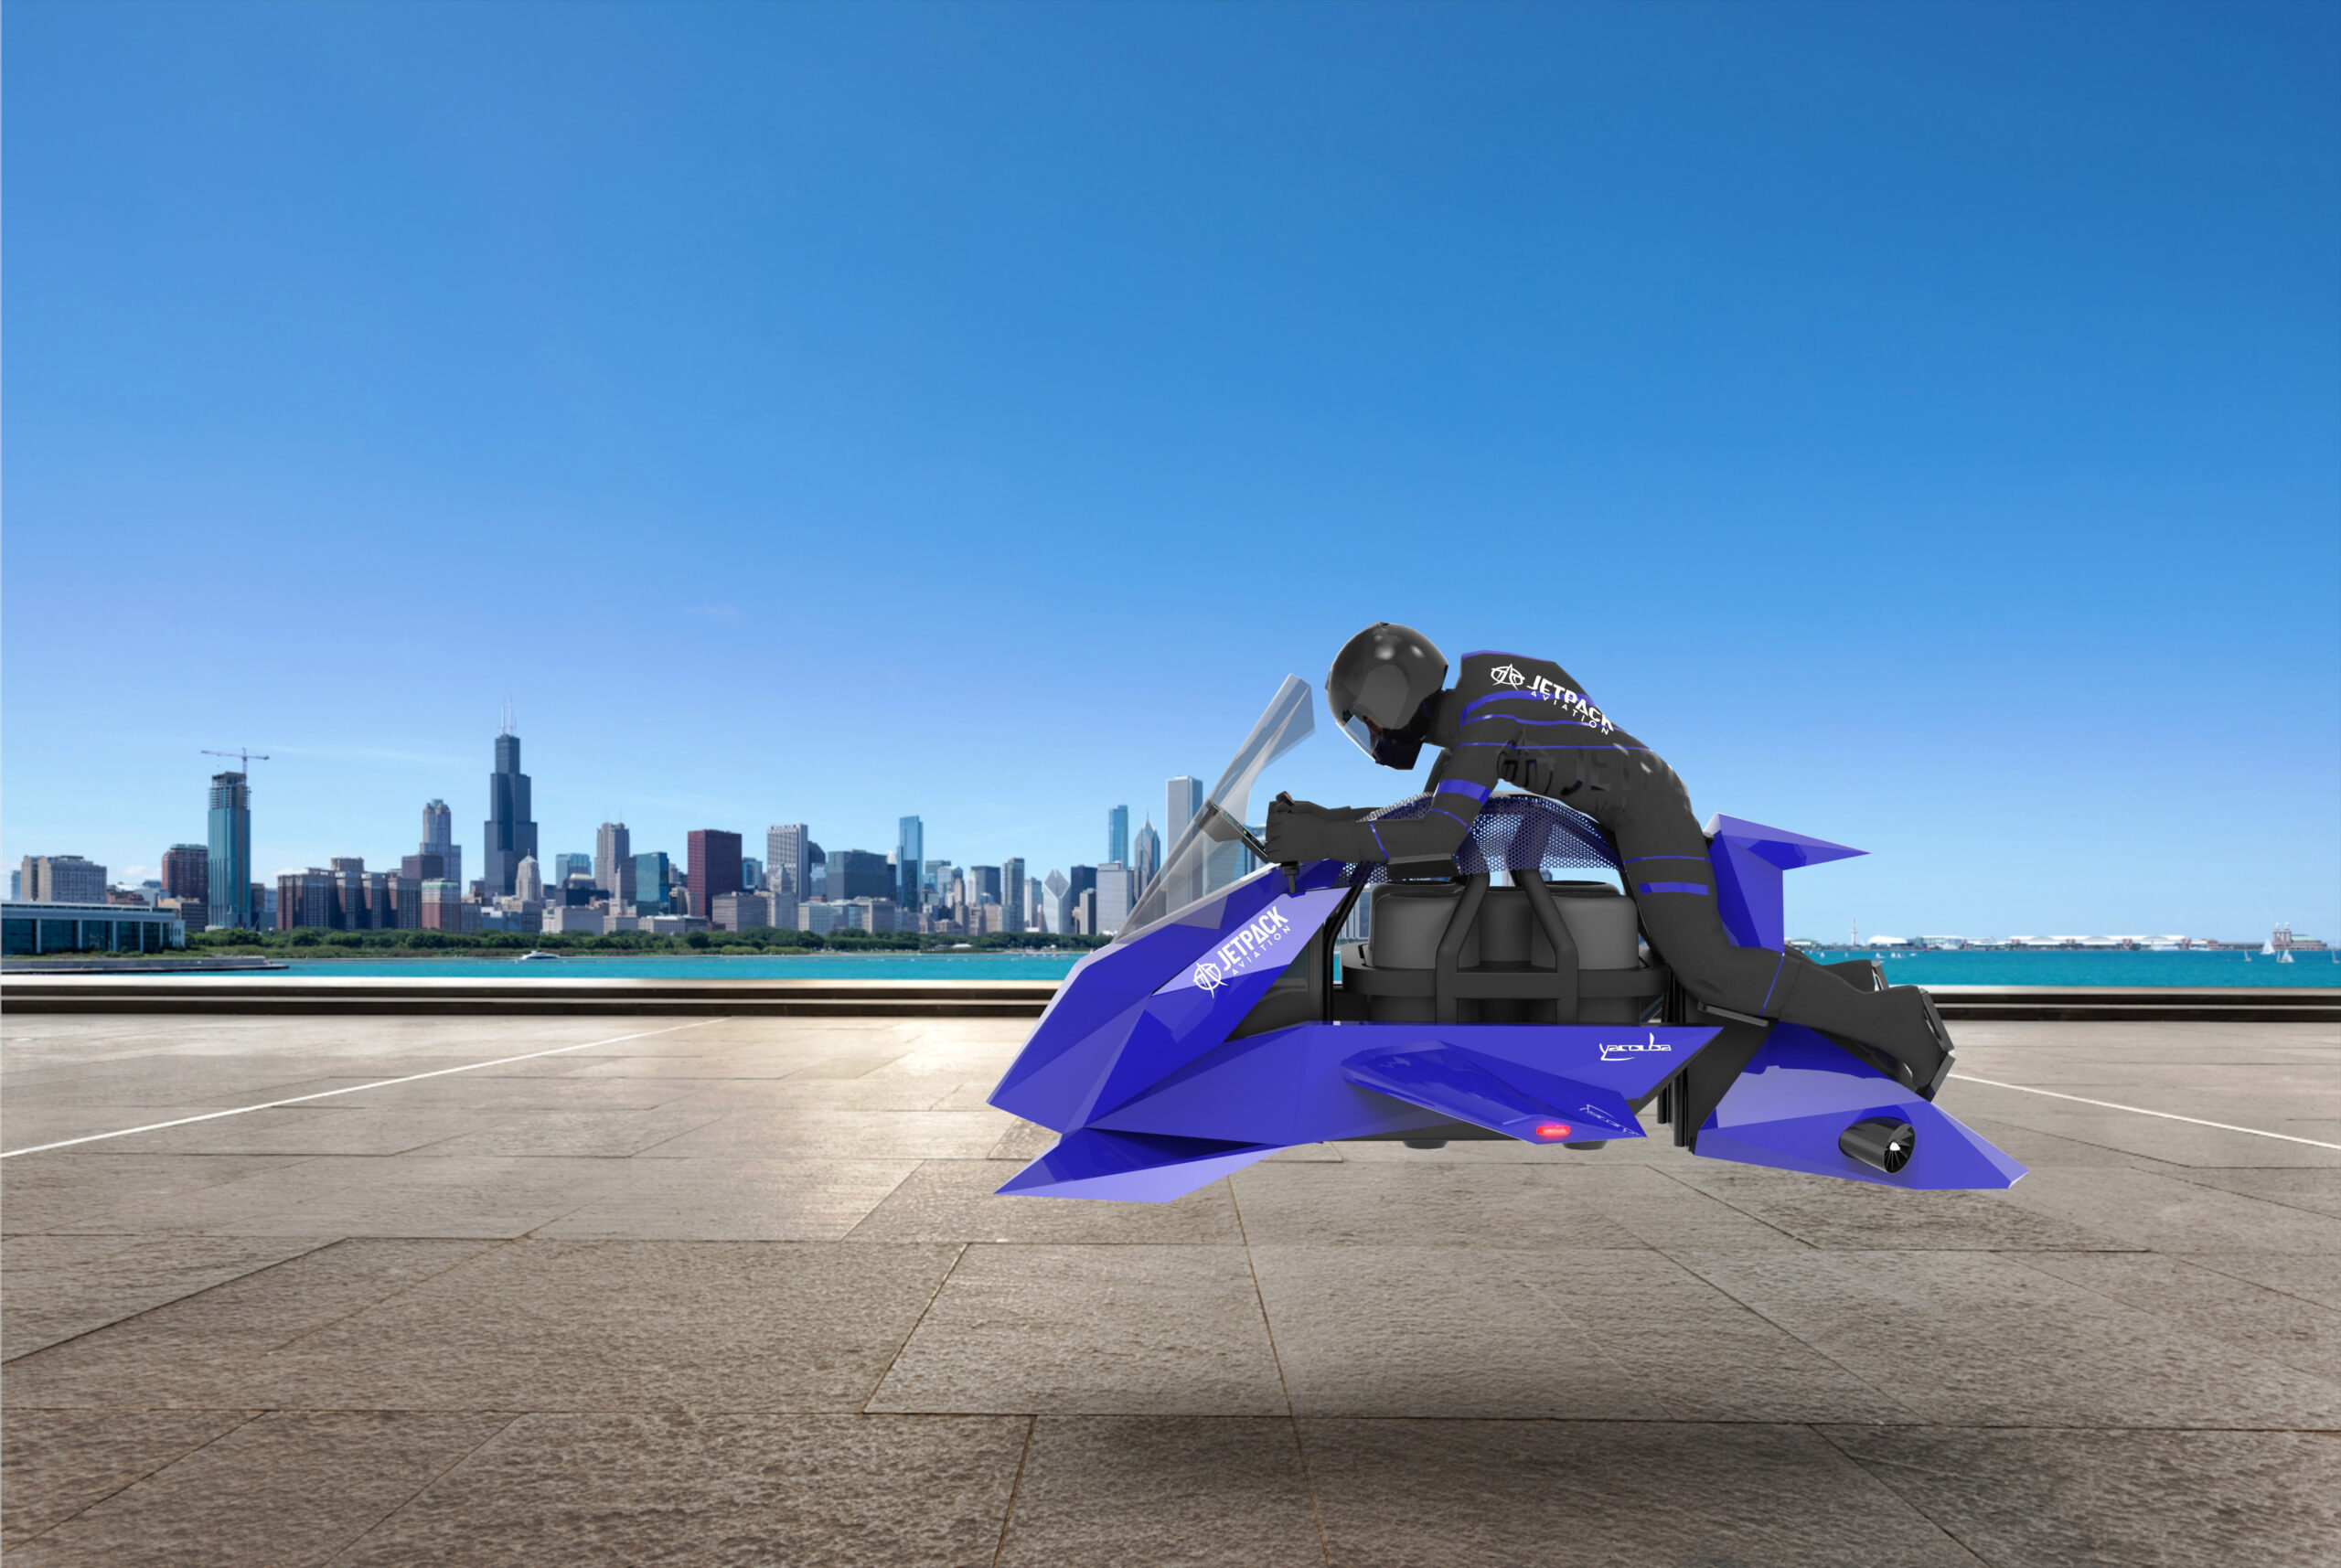 The_Speeder_VTOL_aims_to_use_carbon_neutral_energy